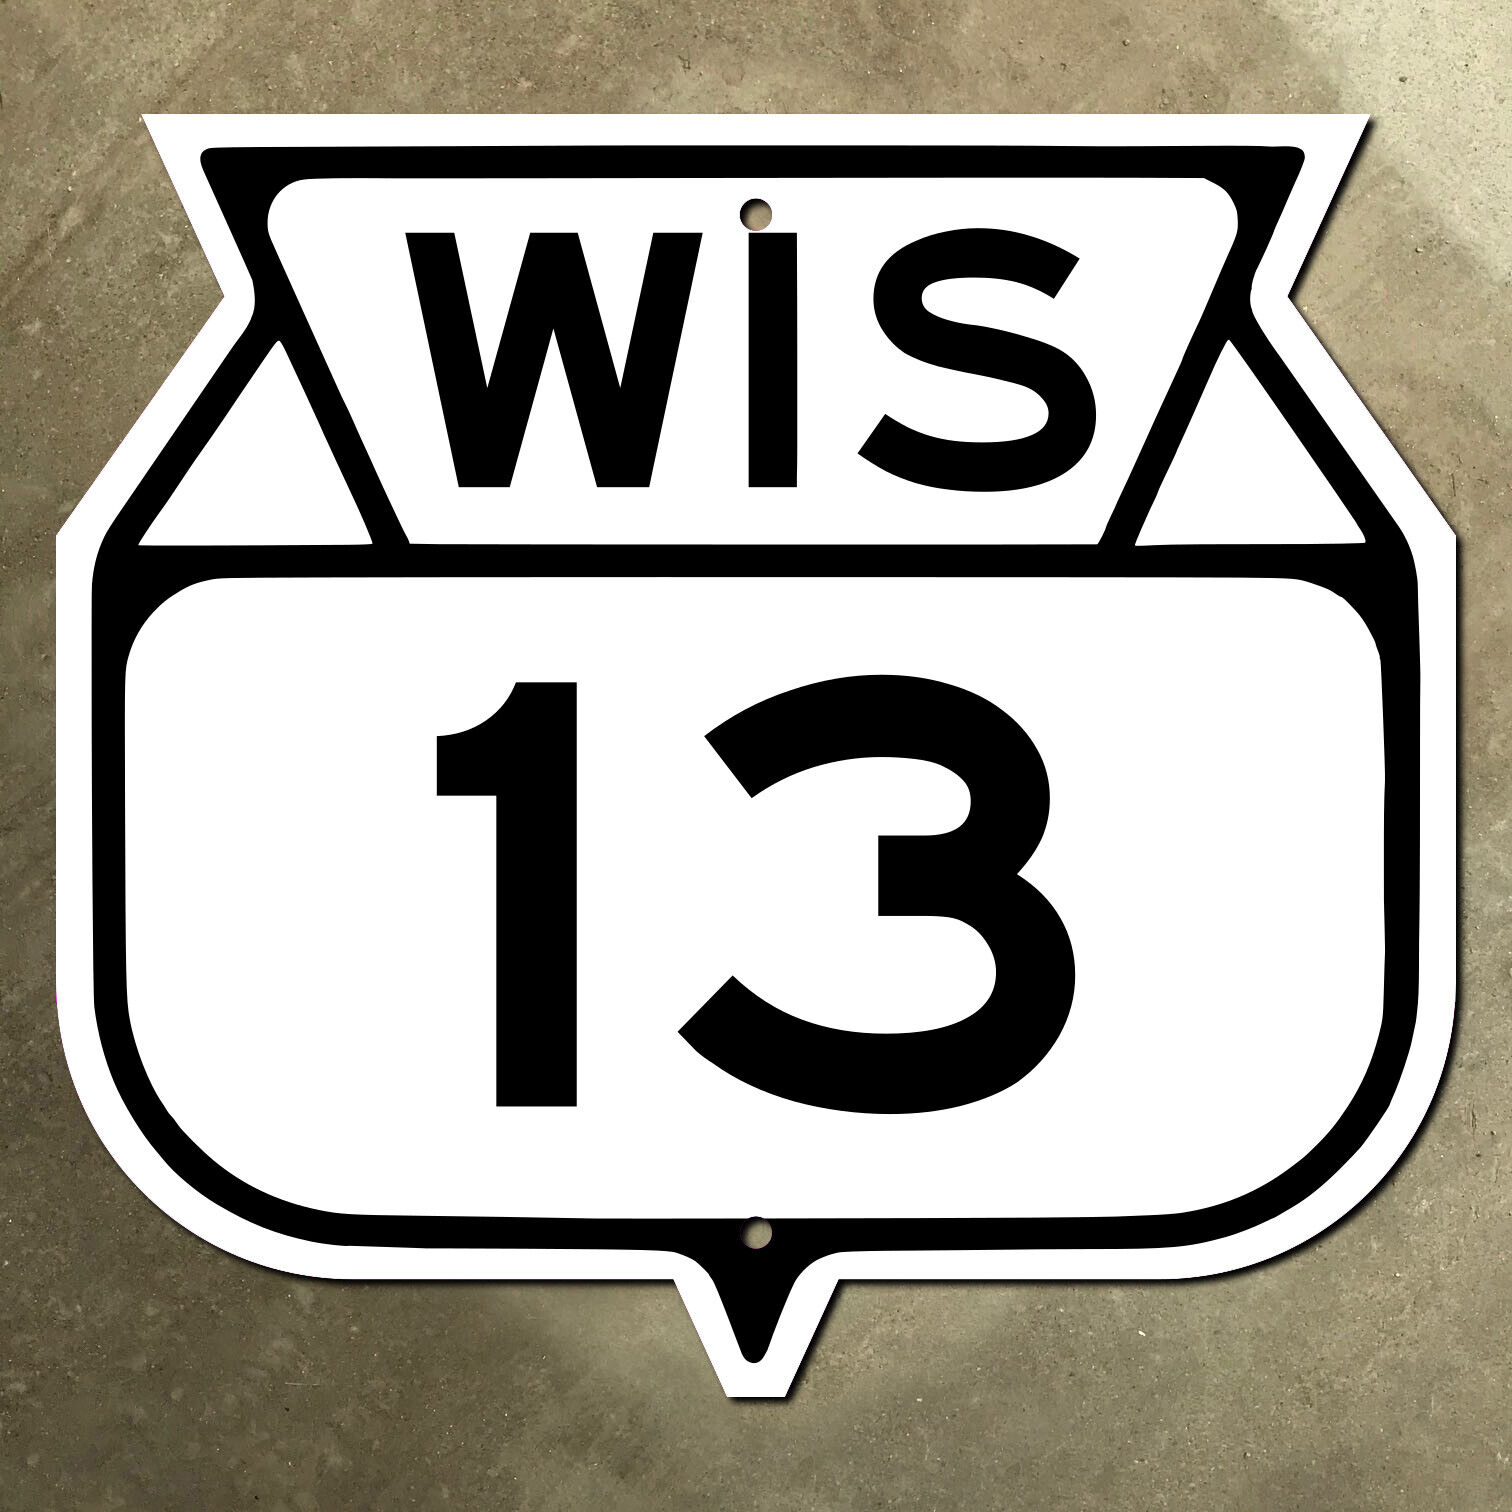 Wisconsin state route 13 highway road sign Dells Lake Superior Ashland 16x15